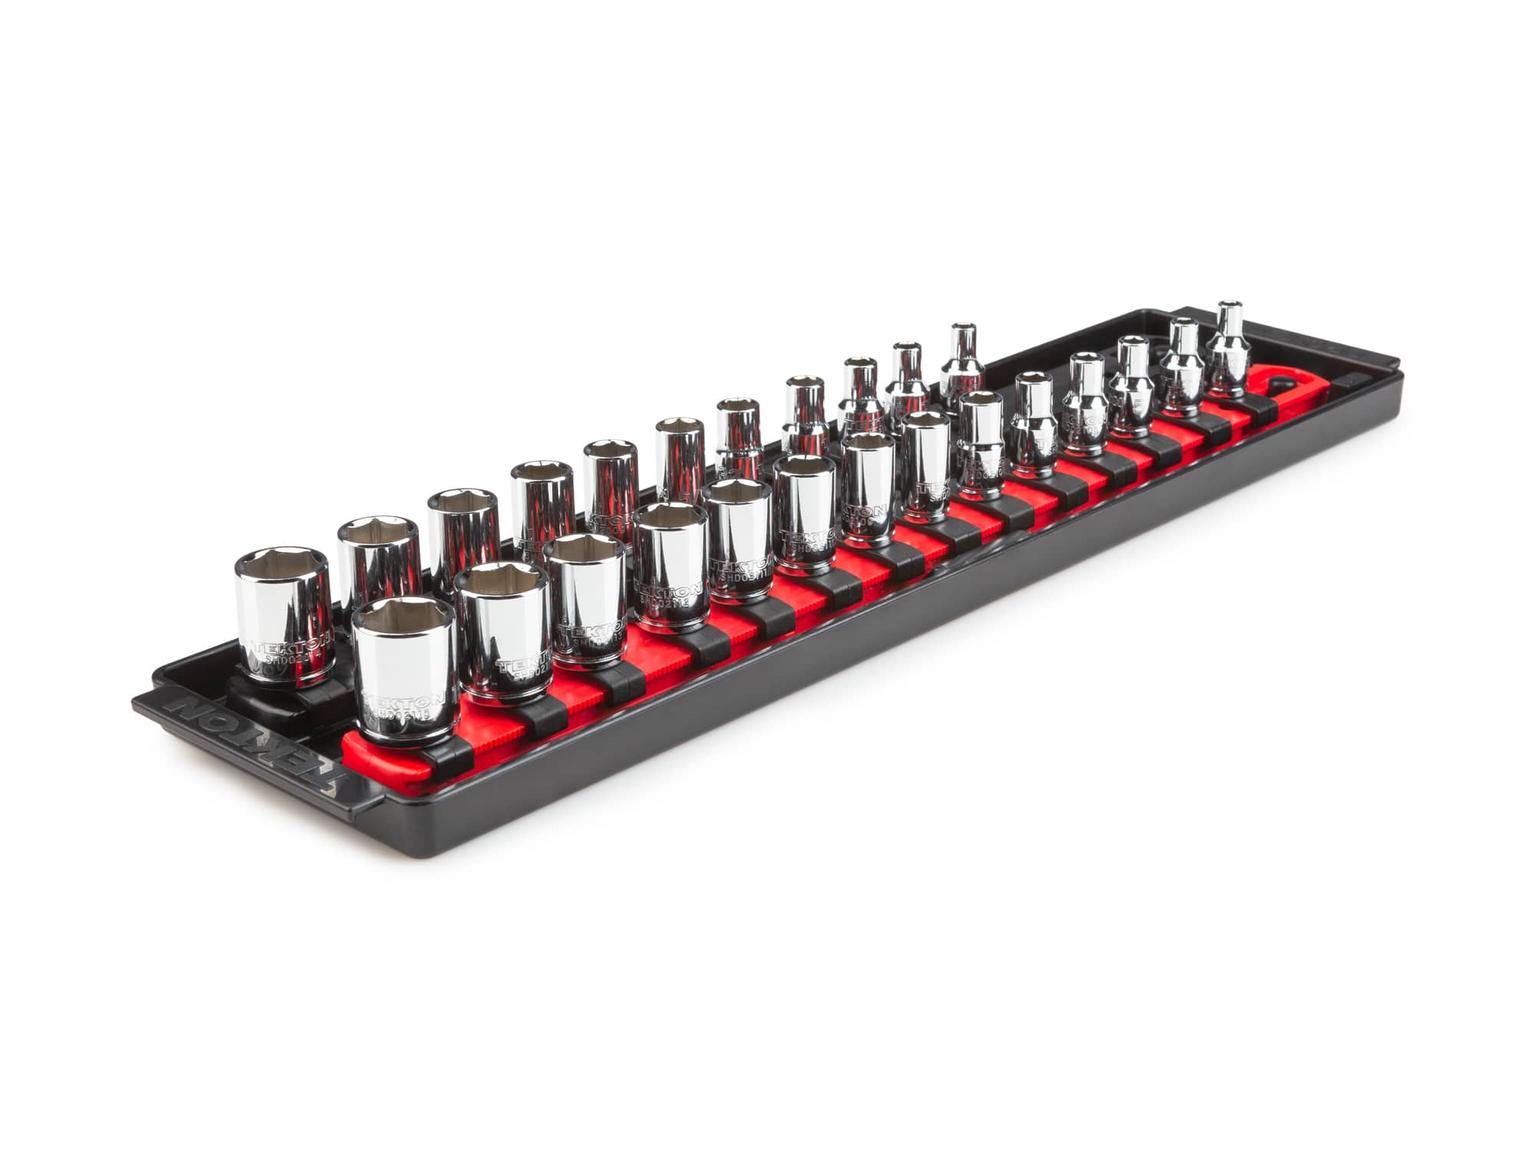 TEKTON SHD90206-T 1/4 Inch Drive 6-Point Socket Set, 25-Piece (5/32-9/16 in., 4-15 mm) with Rails